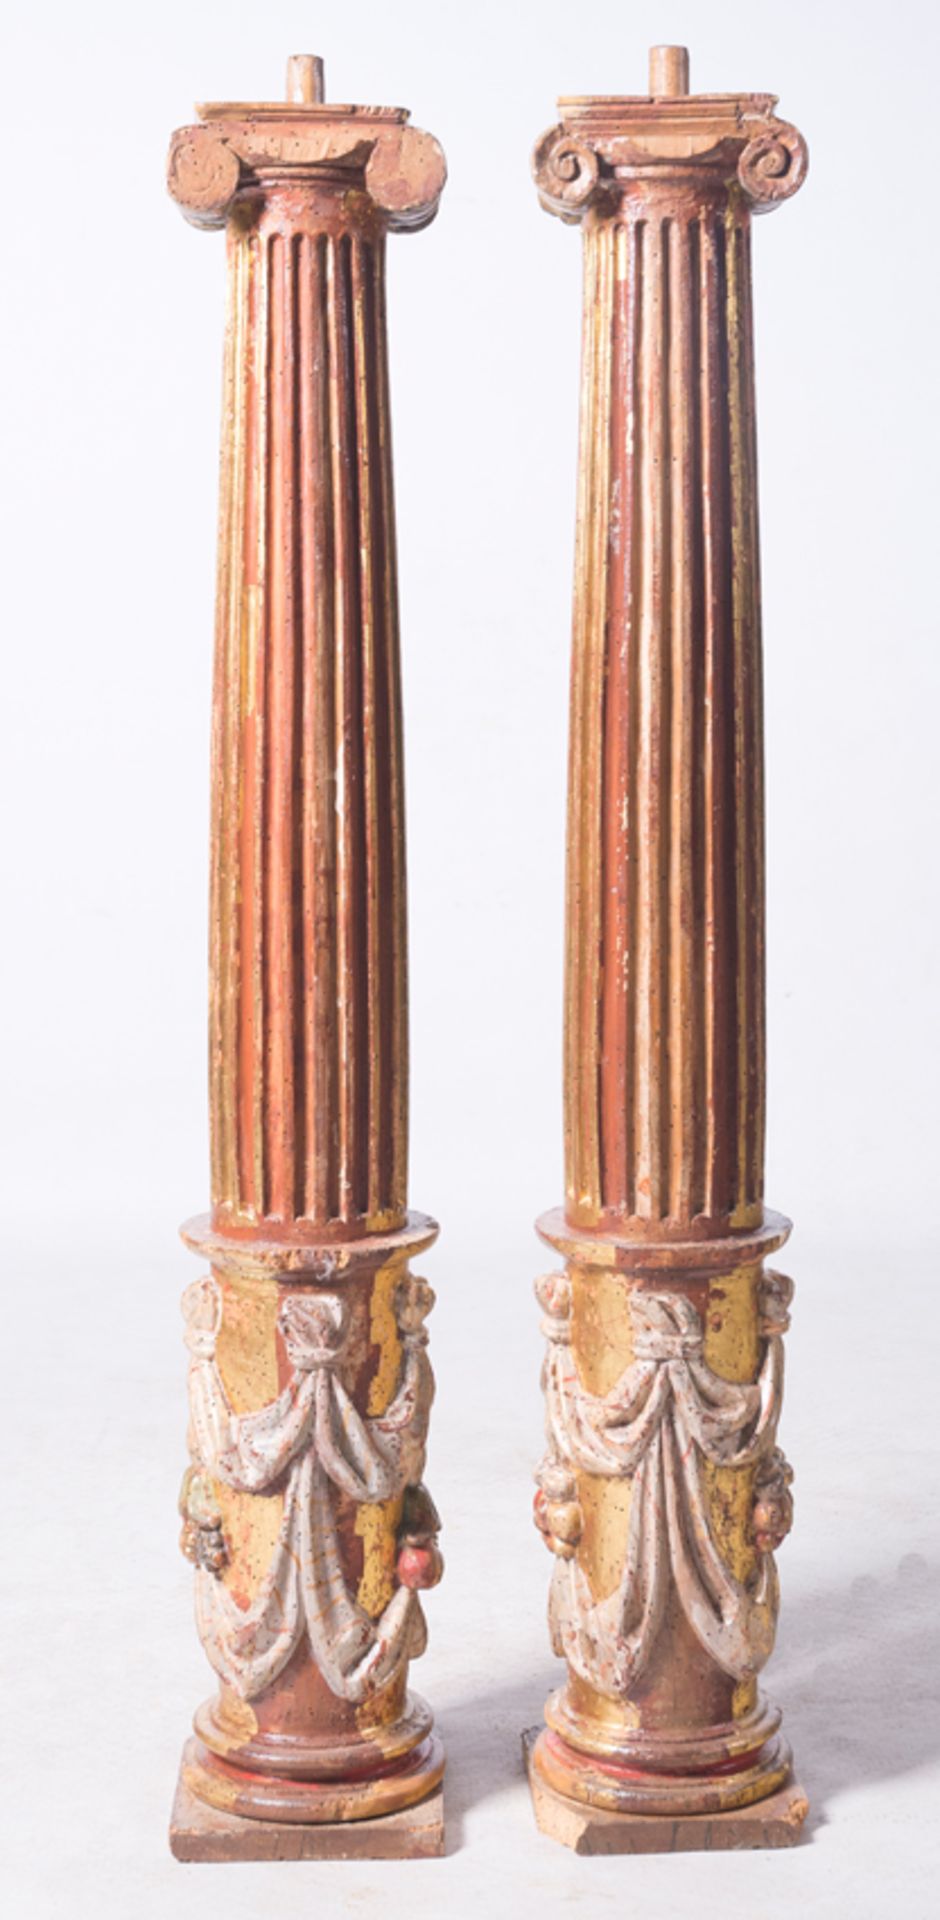 Pair of carved, gilded and polychromed wooden columns with human characters. Castilian School. Renai